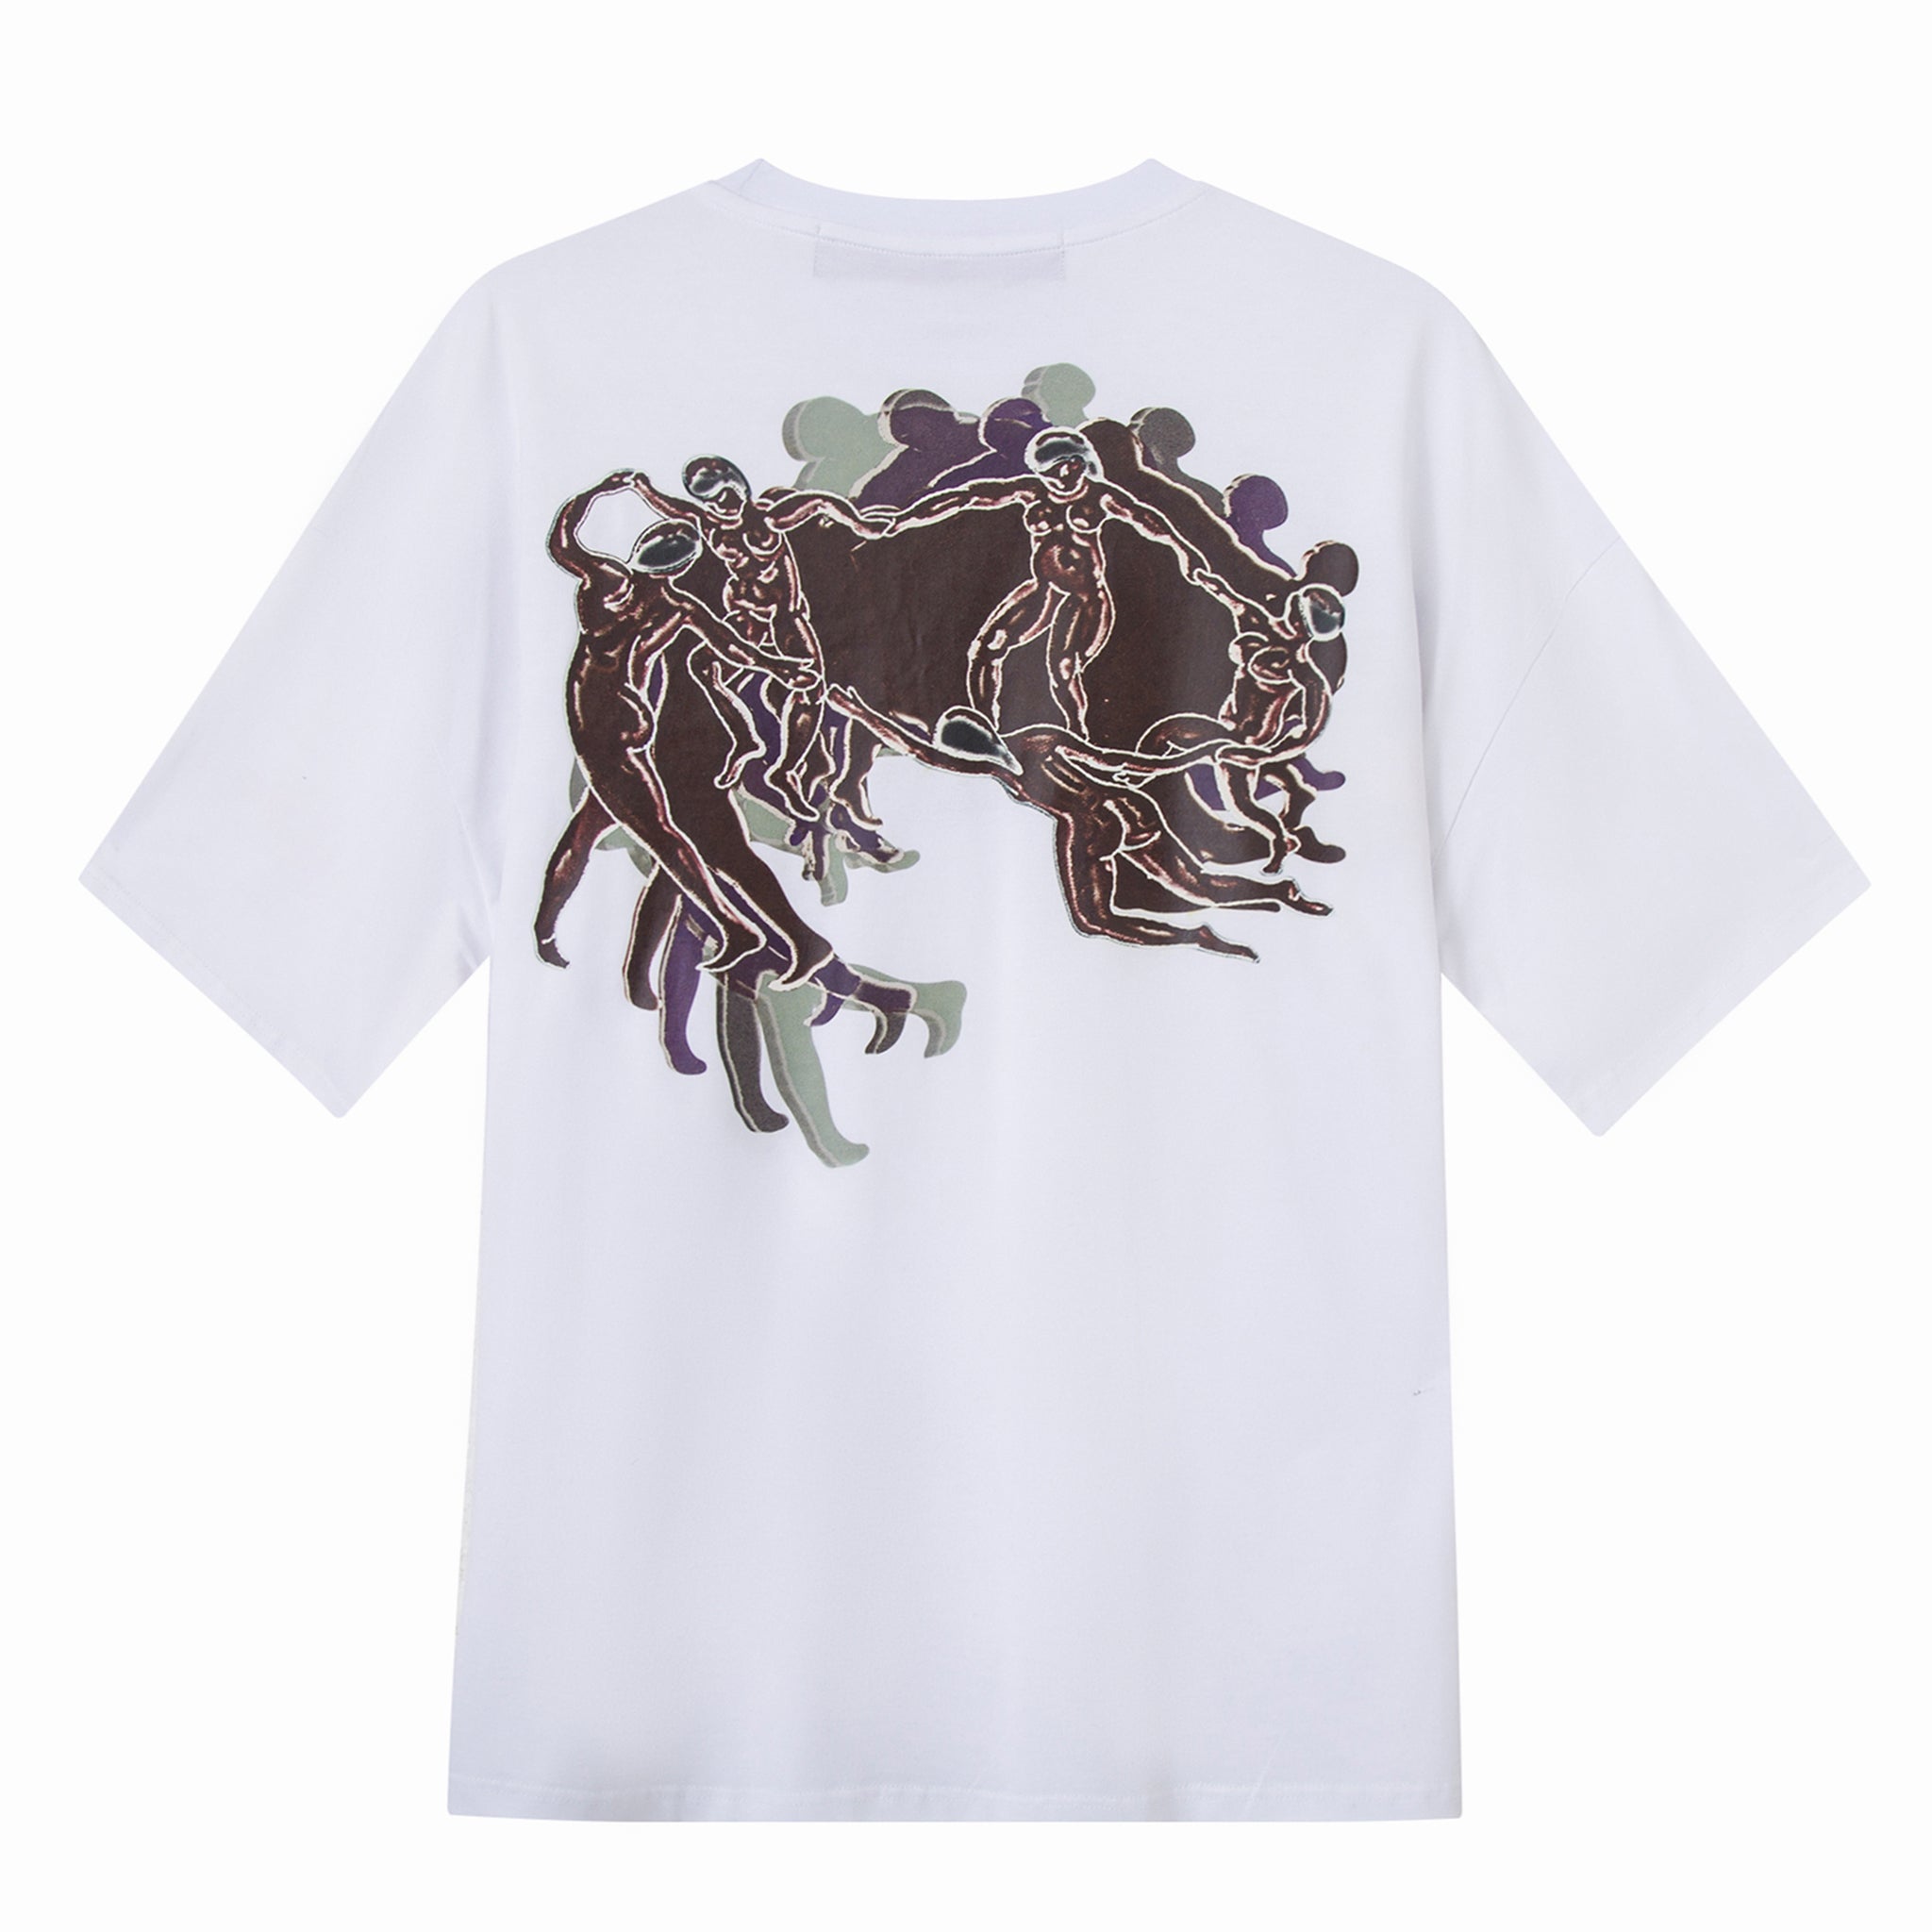 Load image into Gallery viewer, Le Fruit Defendu Ring Dance T-Shirt - White